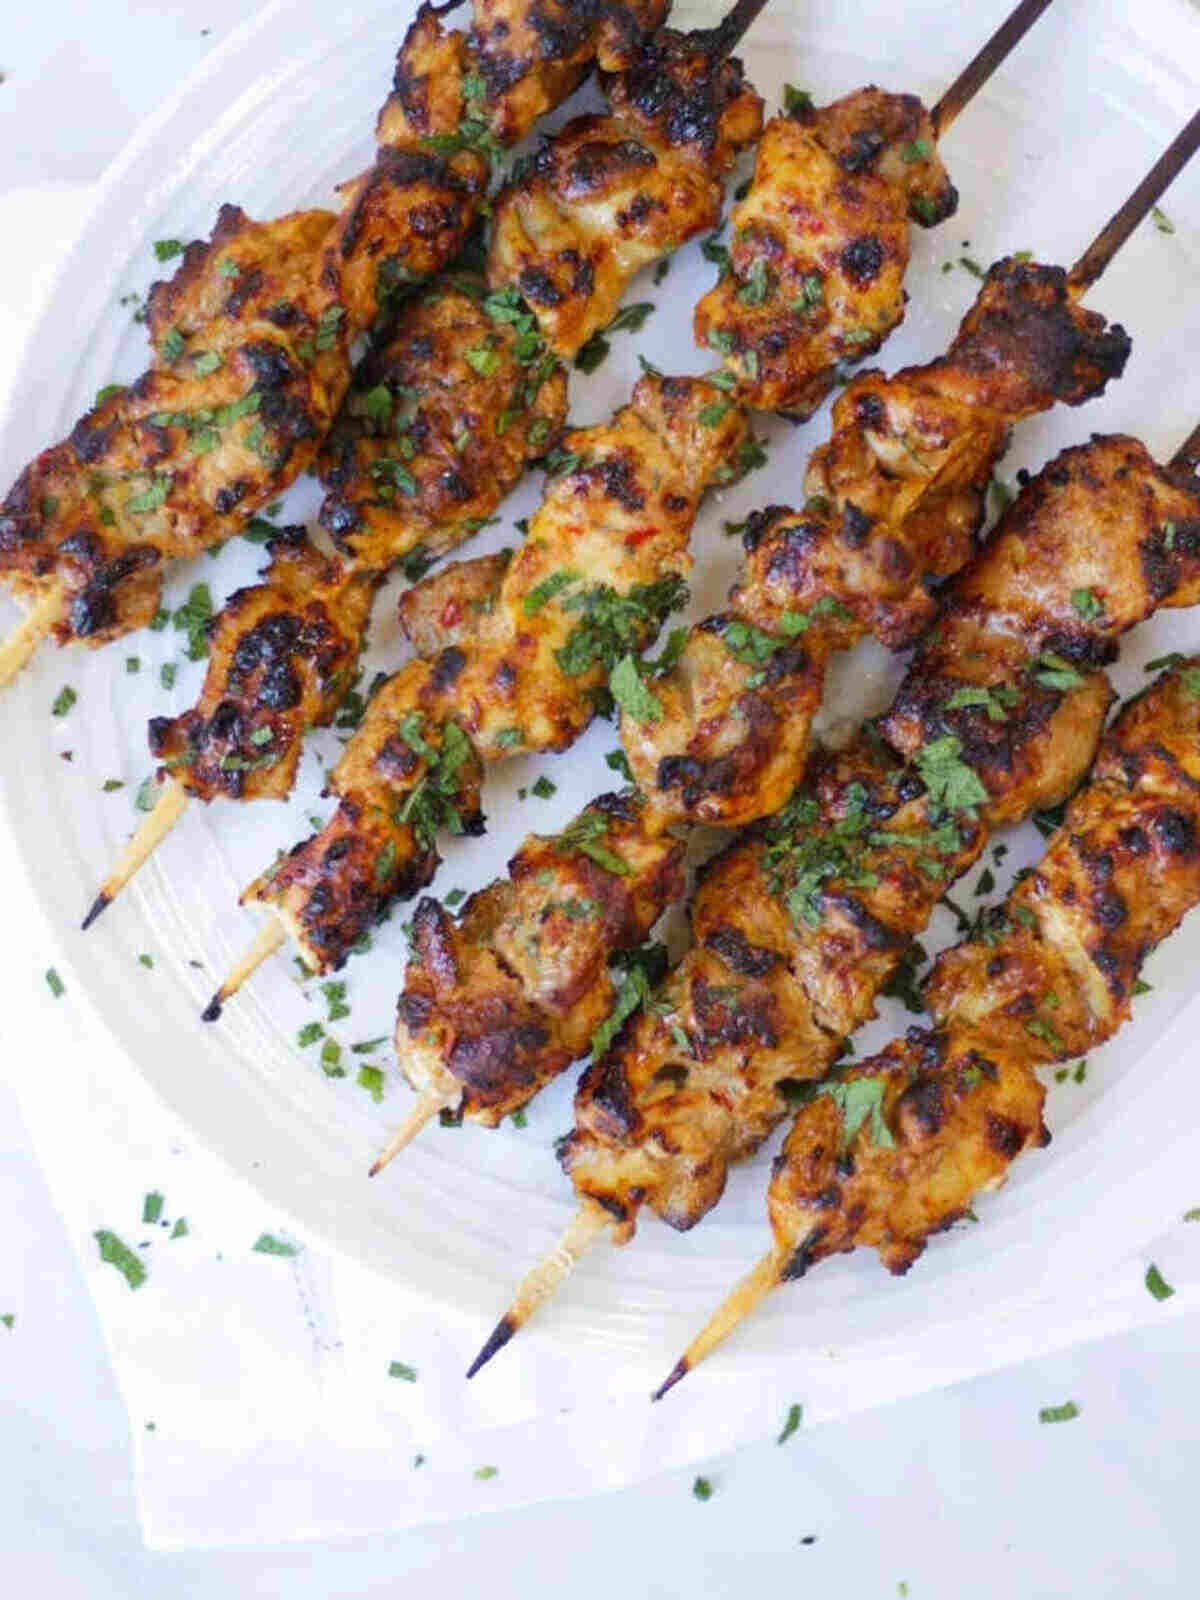 Chicken skewers on a white plate.